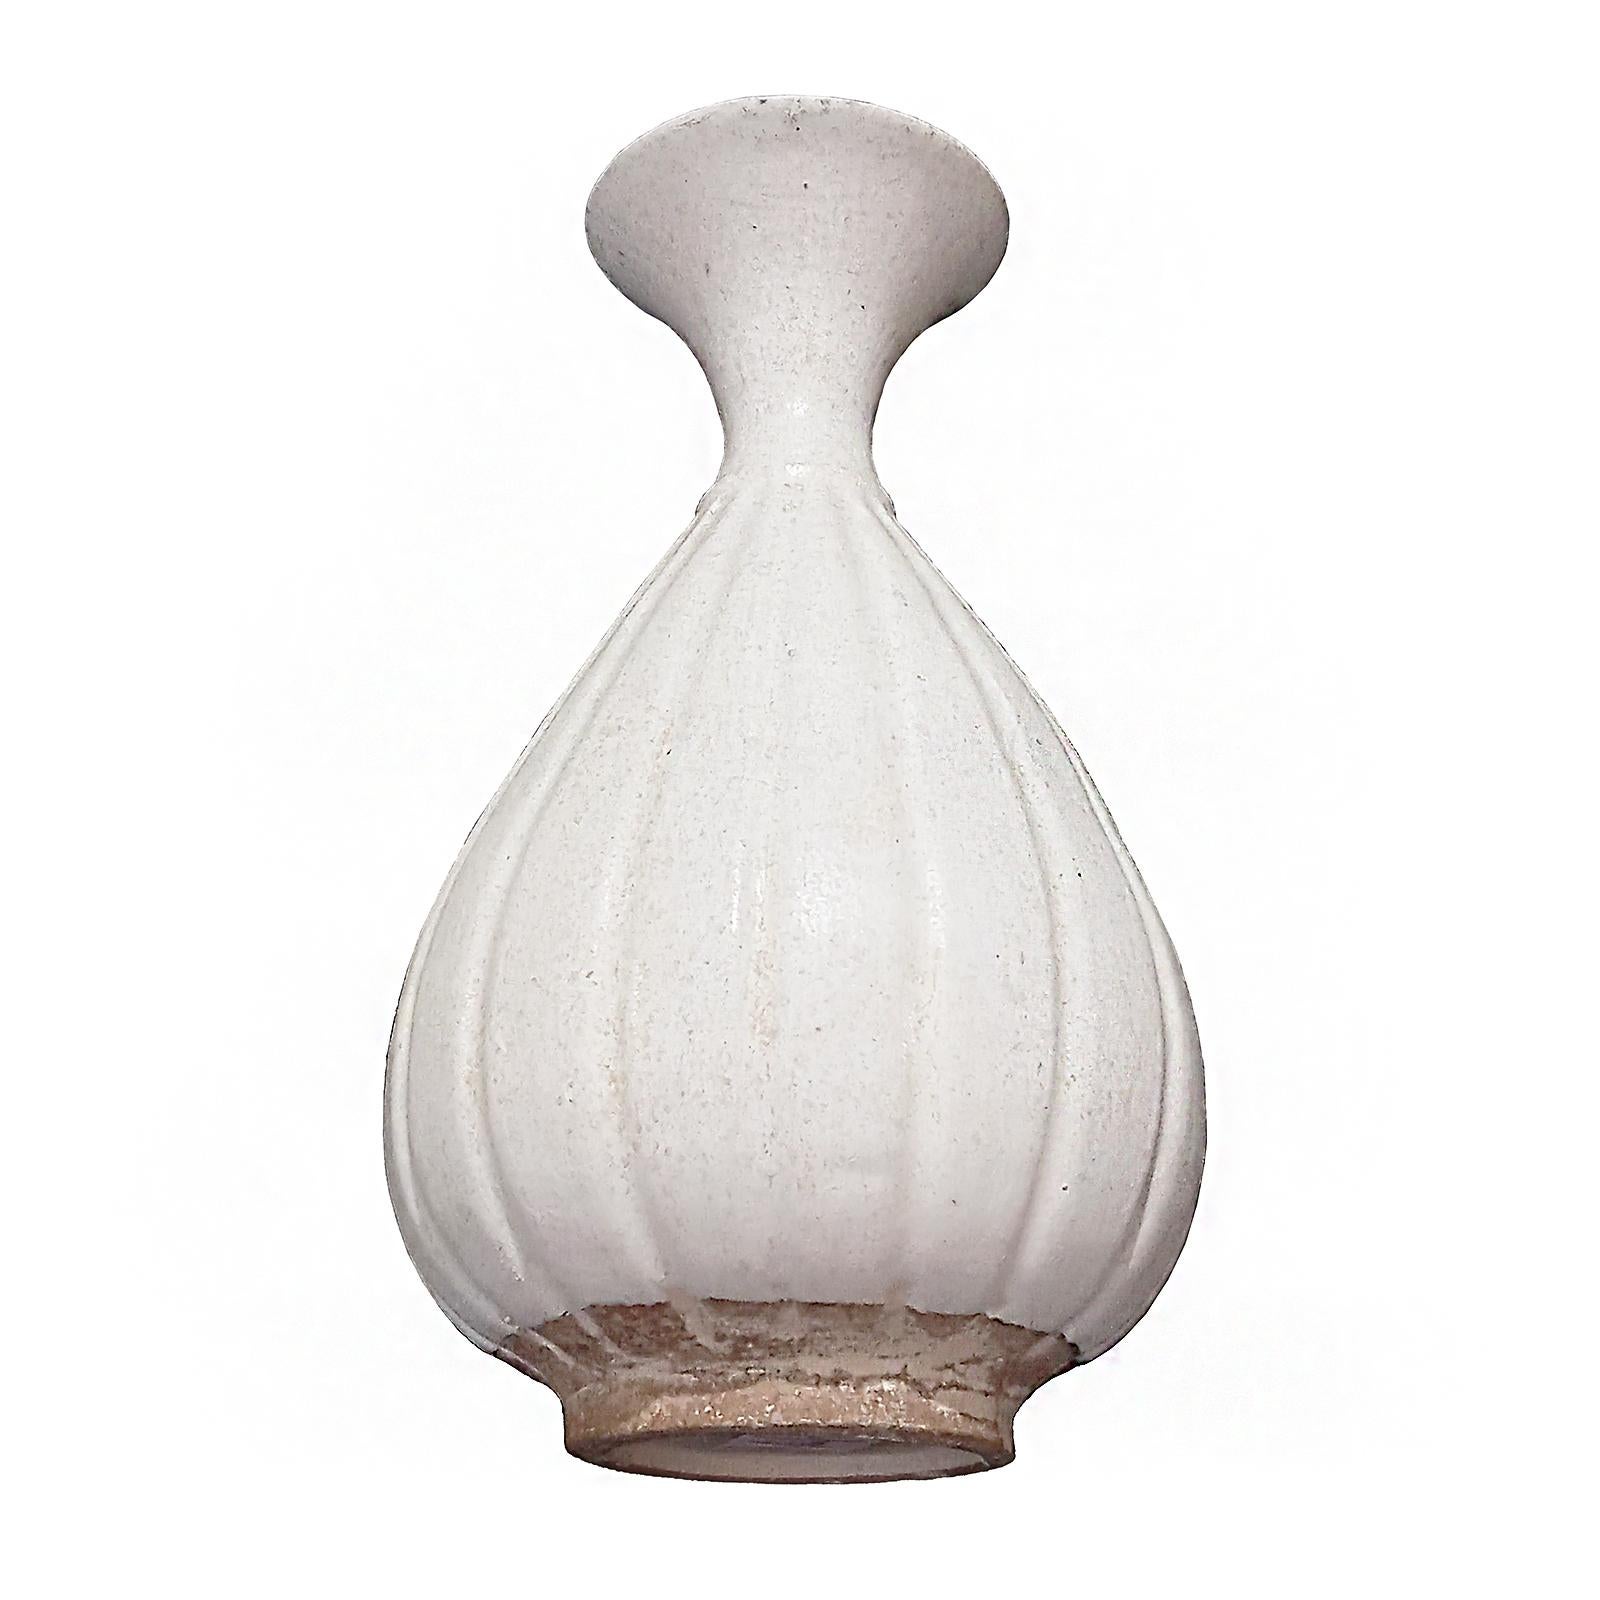 A ceramic vase from Thailand, with white glaze. Contemporary. 

While the golden age of Thai ceramics ended around the 15-16th Centuries, local craftsmen learned the art through generations, later producing smaller numbers of pieces with different